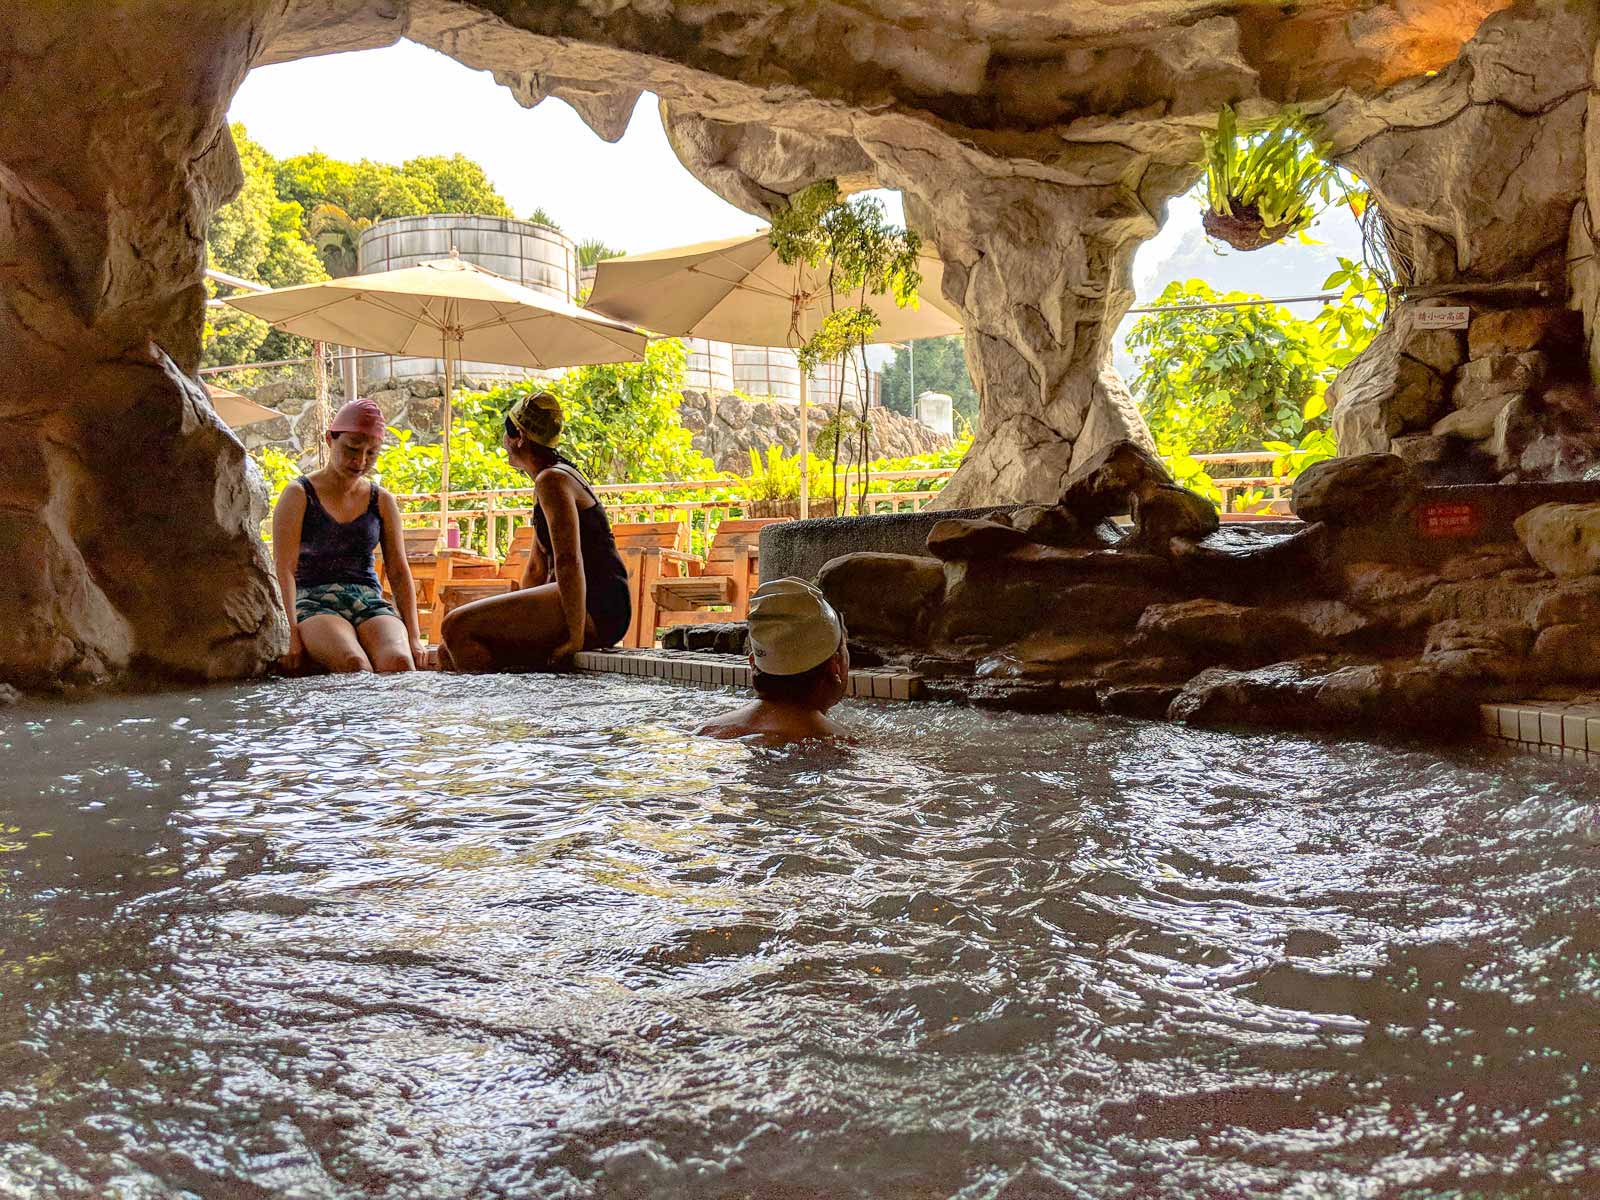 Bathers enjoy an open-air hot spring within a cave-like structure.